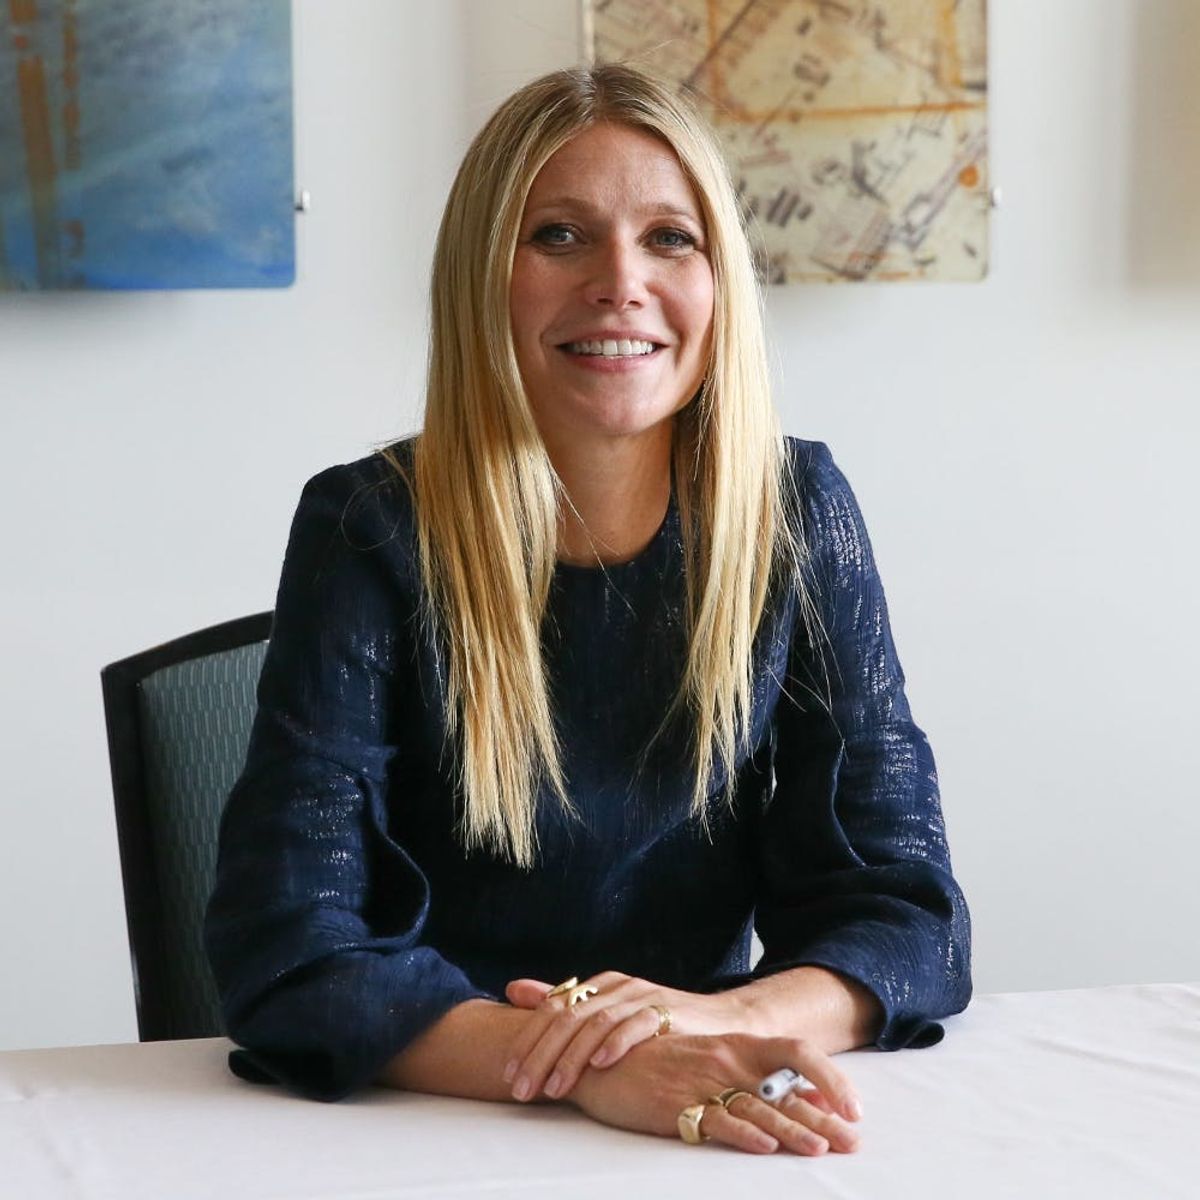 Gwyneth Paltrow Has Launched a GOOP Clothing Line and It’s Pretty Pricey